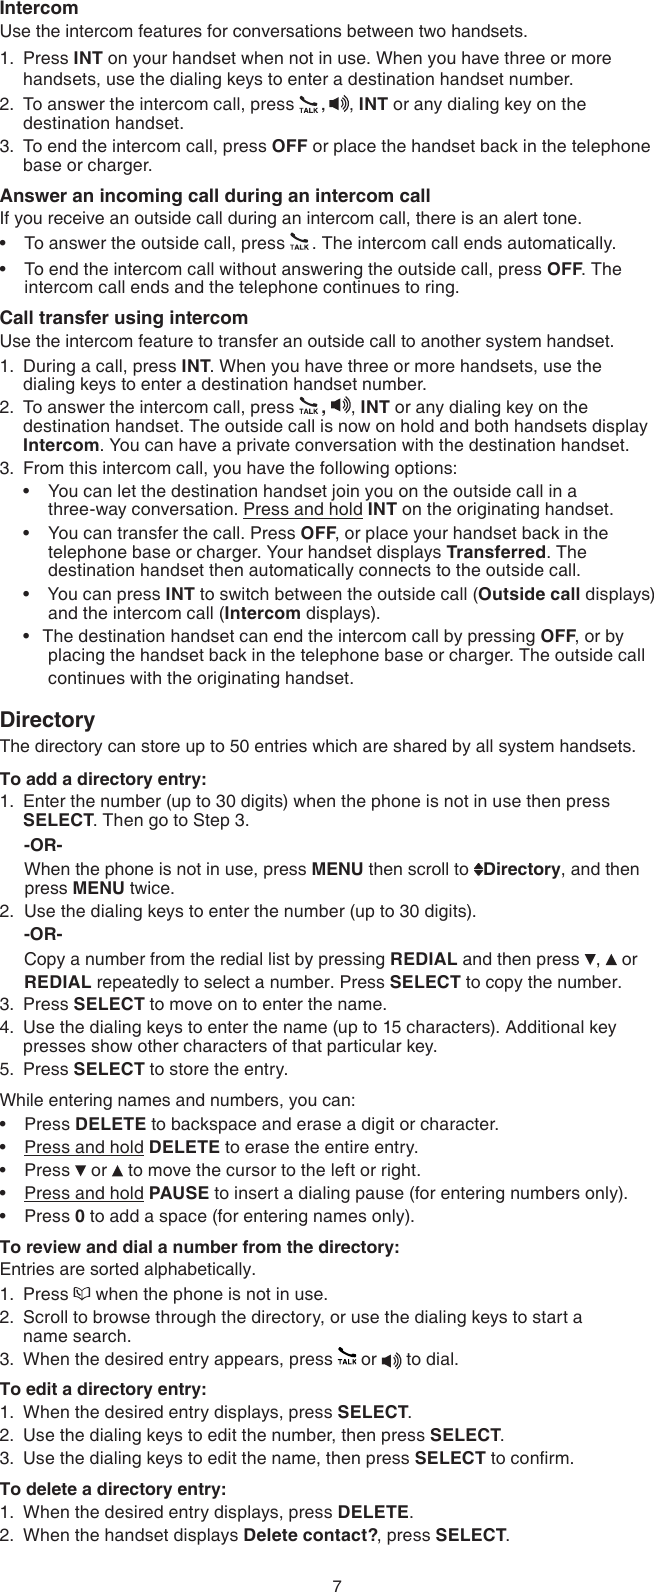 7IntercomUse the intercom features for conversations between two handsets.Press INT on your handset when not in use. When you have three or more handsets, use the dialing keys to enter a destination handset number.To answer the intercom call, press  ,  , INT or any dialing key on the destination handset.To end the intercom call, press OFF or place the handset back in the telephone base or charger.Answer an incoming call during an intercom callIf you receive an outside call during an intercom call, there is an alert tone.To answer the outside call, press  . The intercom call ends automatically.To end the intercom call without answering the outside call, press OFF. The intercom call ends and the telephone continues to ring.Call transfer using intercomUse the intercom feature to transfer an outside call to another system handset.During a call, press INT. When you have three or more handsets, use the dialing keys to enter a destination handset number.To answer the intercom call, press  ,  , INT or any dialing key on the destination handset. The outside call is now on hold and both handsets display Intercom. You can have a private conversation with the destination handset.From this intercom call, you have the following options:  You can let the destination handset join you on the outside call in a       three-way conversation. Press and hold INT on the originating handset.  You can transfer the call. Press OFF, or place your handset back in the telephone base or charger. Your handset displays Transferred. The destination handset then automatically connects to the outside call.   You can press INT to switch between the outside call (Outside call displays) and the intercom call (Intercom displays).  The destination handset can end the intercom call by pressing OFF, or by placing the handset back in the telephone base or charger. The outside call  continues with the originating handset.DirectoryThe directory can store up to 50 entries which are shared by all system handsets.To add a directory entry:Enter the number (up to 30 digits) when the phone is not in use then press SELECT. Then go to Step 3.      -OR-     When the phone is not in use, press MENU then scroll to  Directory, and then     press MENU twice.2.  Use the dialing keys to enter the number (up to 30 digits).     -OR-     Copy a number from the redial list by pressing REDIAL and then press  ,   or       REDIAL repeatedly to select a number. Press SELECT to copy the number.Press SELECT to move on to enter the name.Use the dialing keys to enter the name (up to 15 characters). Additional key presses show other characters of that particular key.Press SELECT to store the entry.While entering names and numbers, you can:Press DELETE to backspace and erase a digit or character.Press and hold DELETE to erase the entire entry.Press   or   to move the cursor to the left or right. Press and hold PAUSE to insert a dialing pause (for entering numbers only).Press 0 to add a space (for entering names only).To review and dial a number from the directory:Entries are sorted alphabetically.Press   when the phone is not in use.Scroll to browse through the directory, or use the dialing keys to start a  name search.When the desired entry appears, press   or   to dial.To edit a directory entry:When the desired entry displays, press SELECT.Use the dialing keys to edit the number, then press SELECT.Use the dialing keys to edit the name, then press SELECT to conrm.To delete a directory entry:When the desired entry displays, press DELETE.When the handset displays Delete contact?, press SELECT.1.2.3.••1.2.3.••••1.3.4.5.•••••1.2.3.1.2.3.1.2.